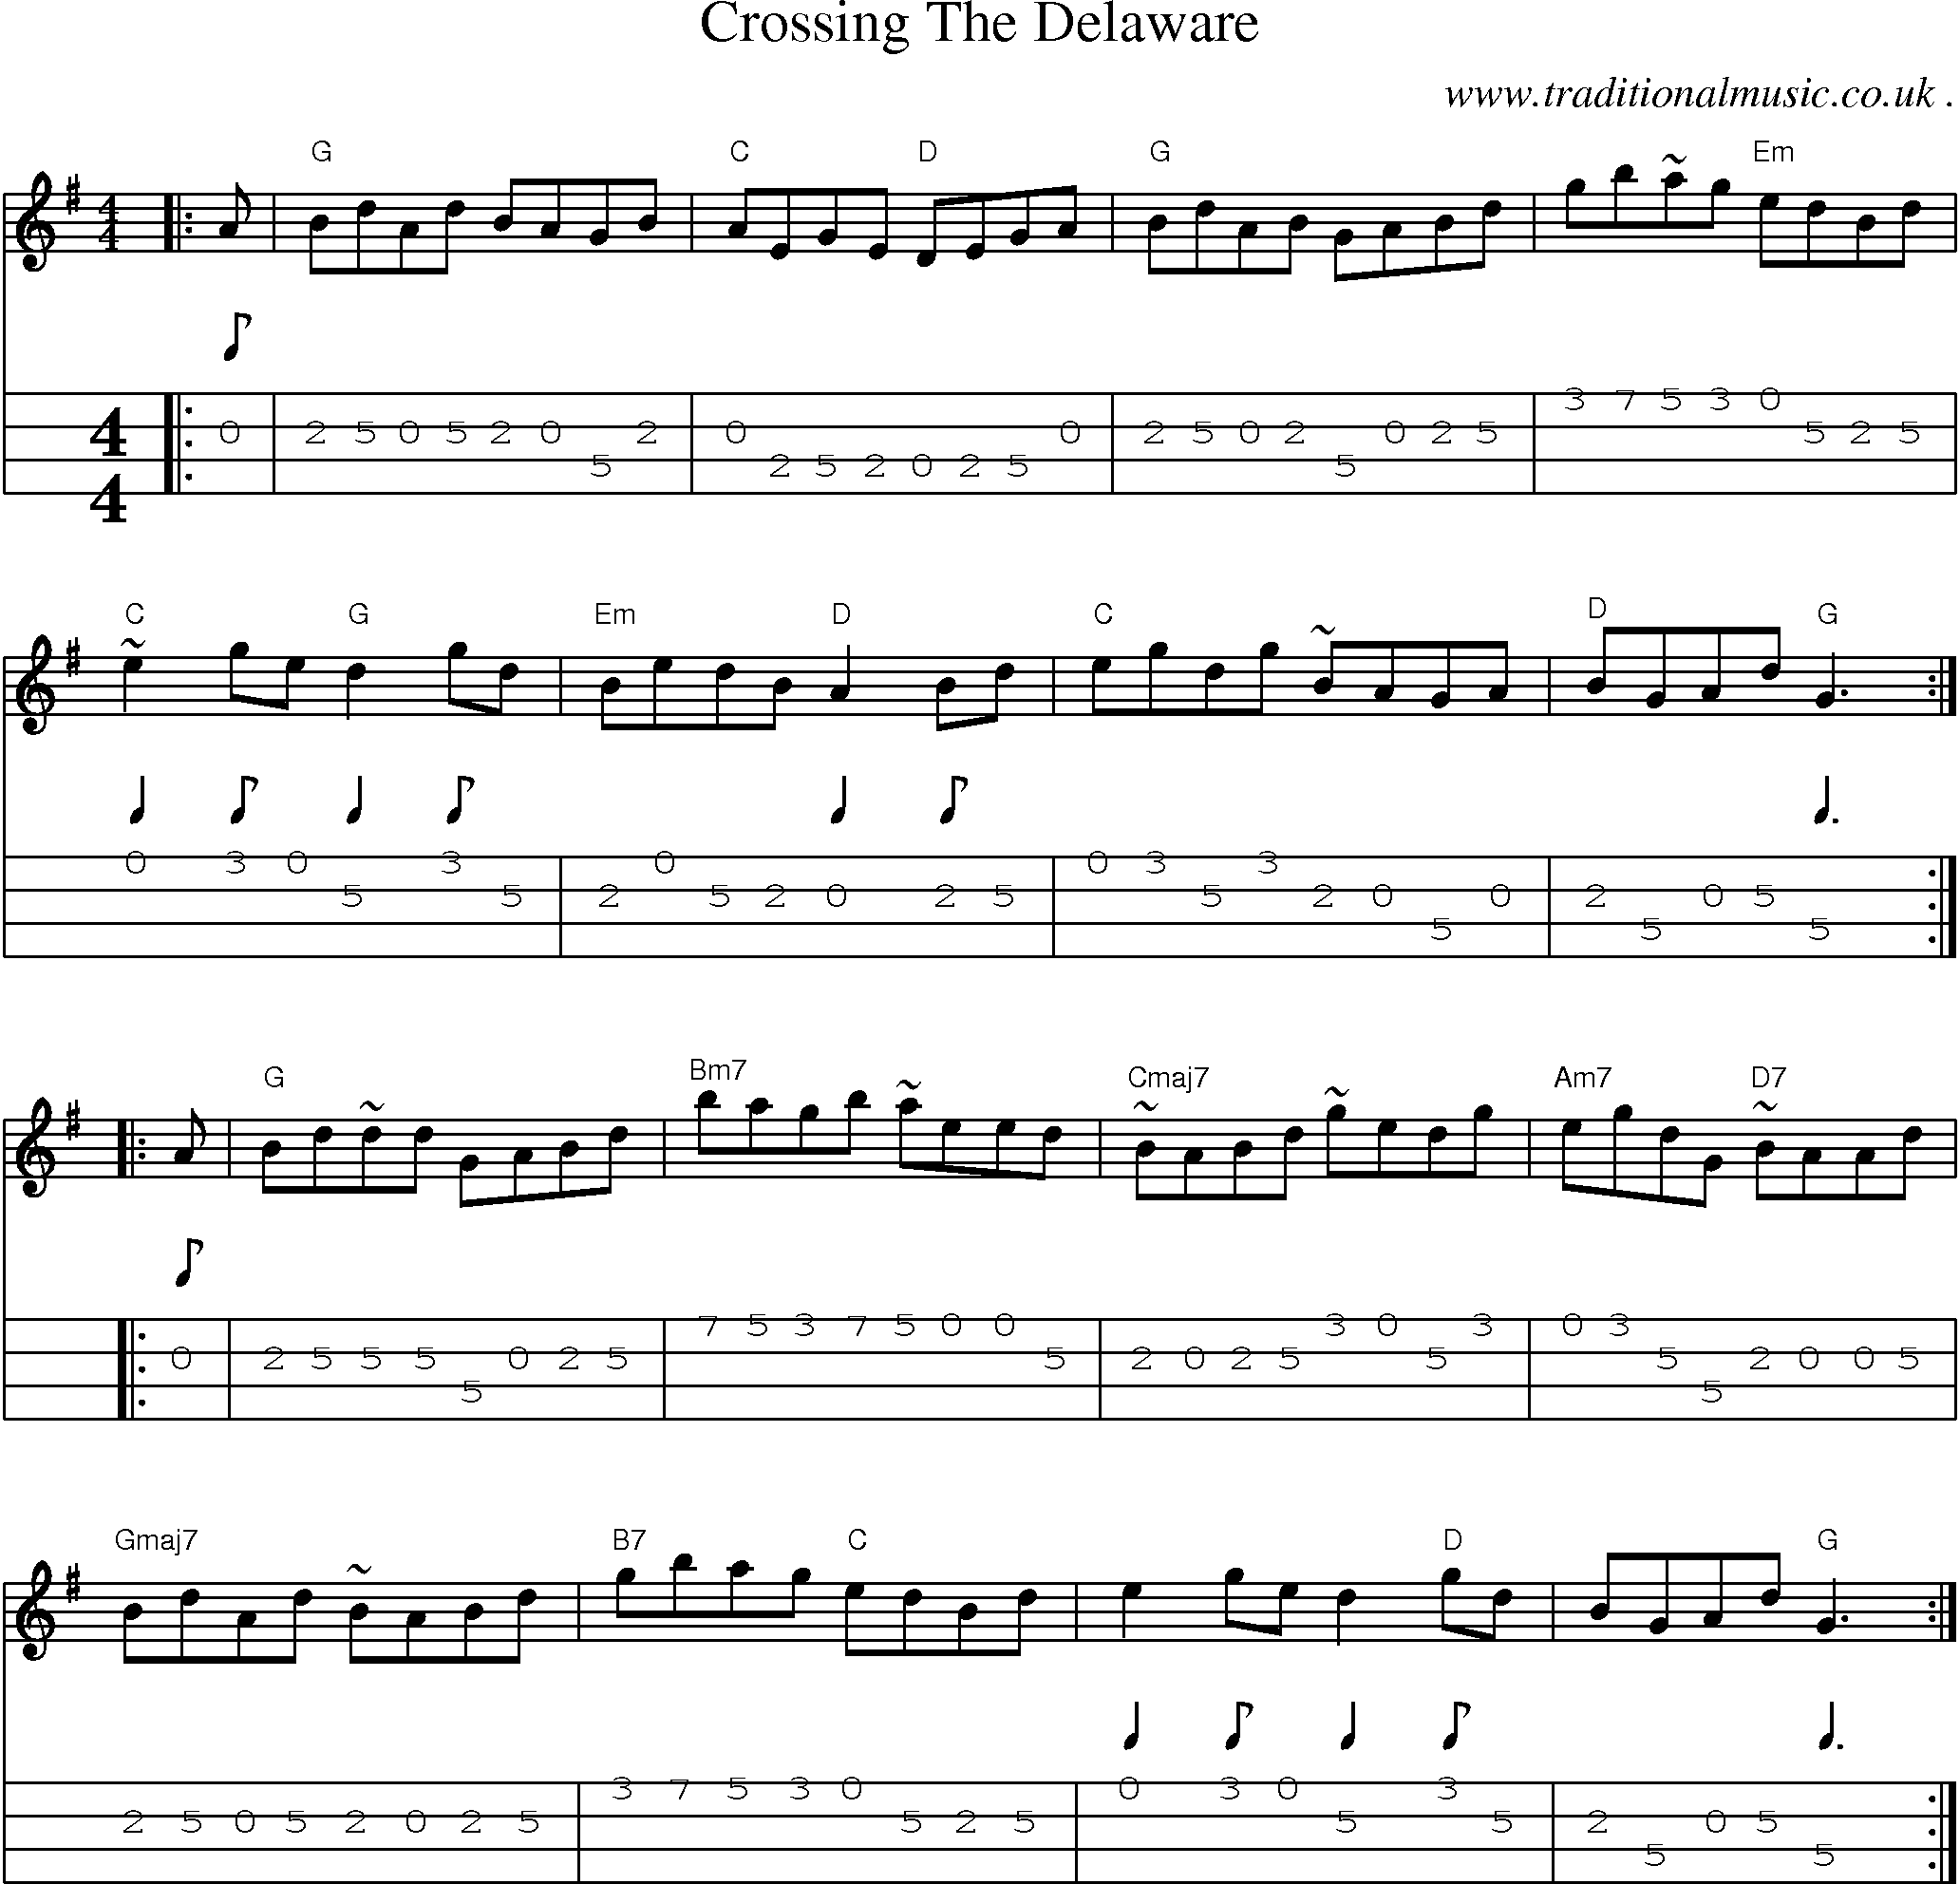 Music Score and Guitar Tabs for Crossing The Delaware